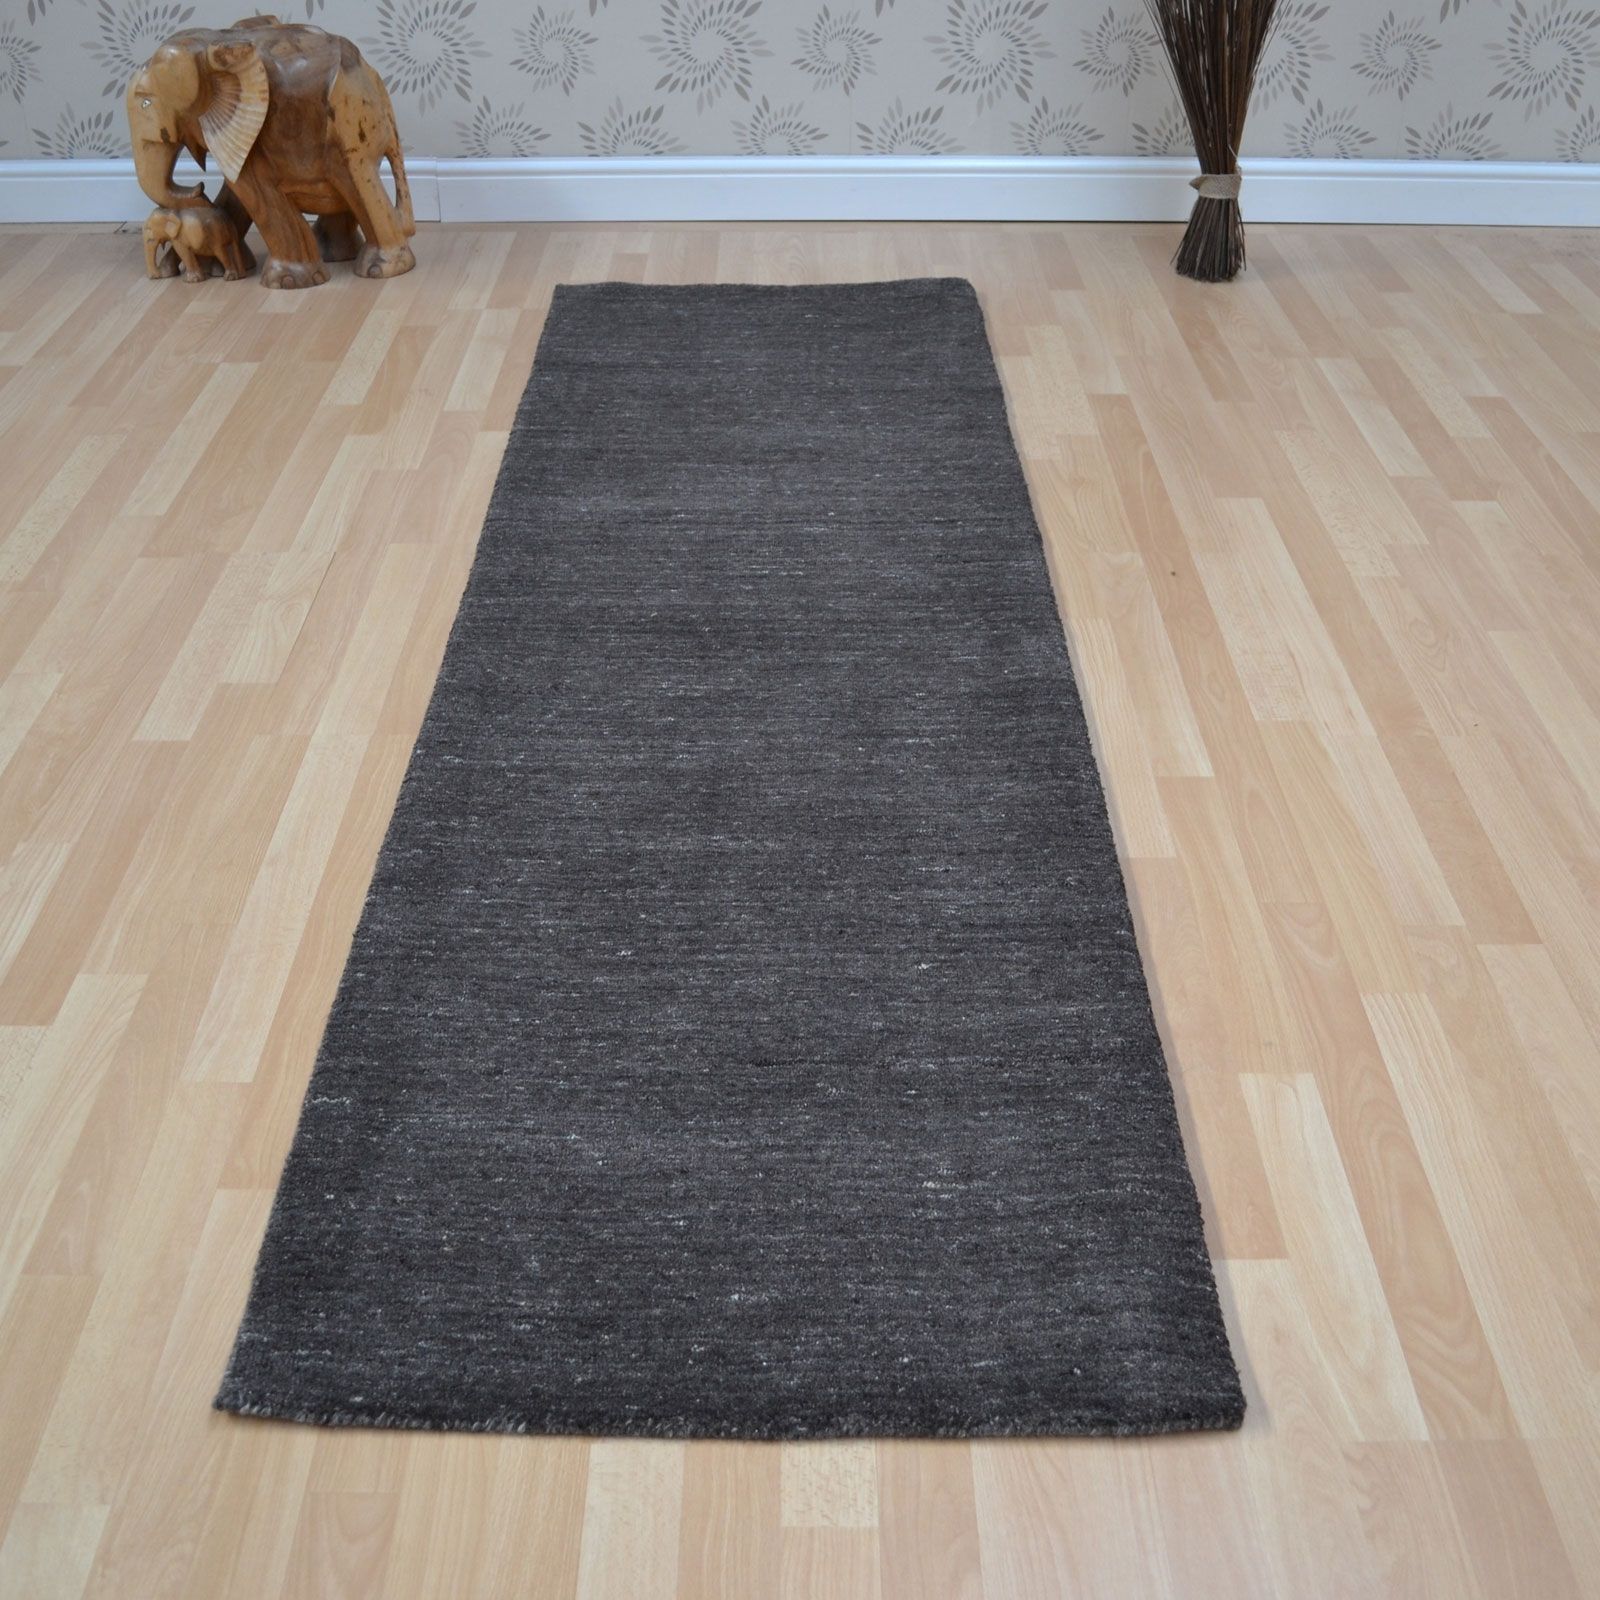 Plain Abrash Wool Hallway Runners In Grey Free Uk Delivery The With Regard To Wool Hallway Runners (View 3 of 20)